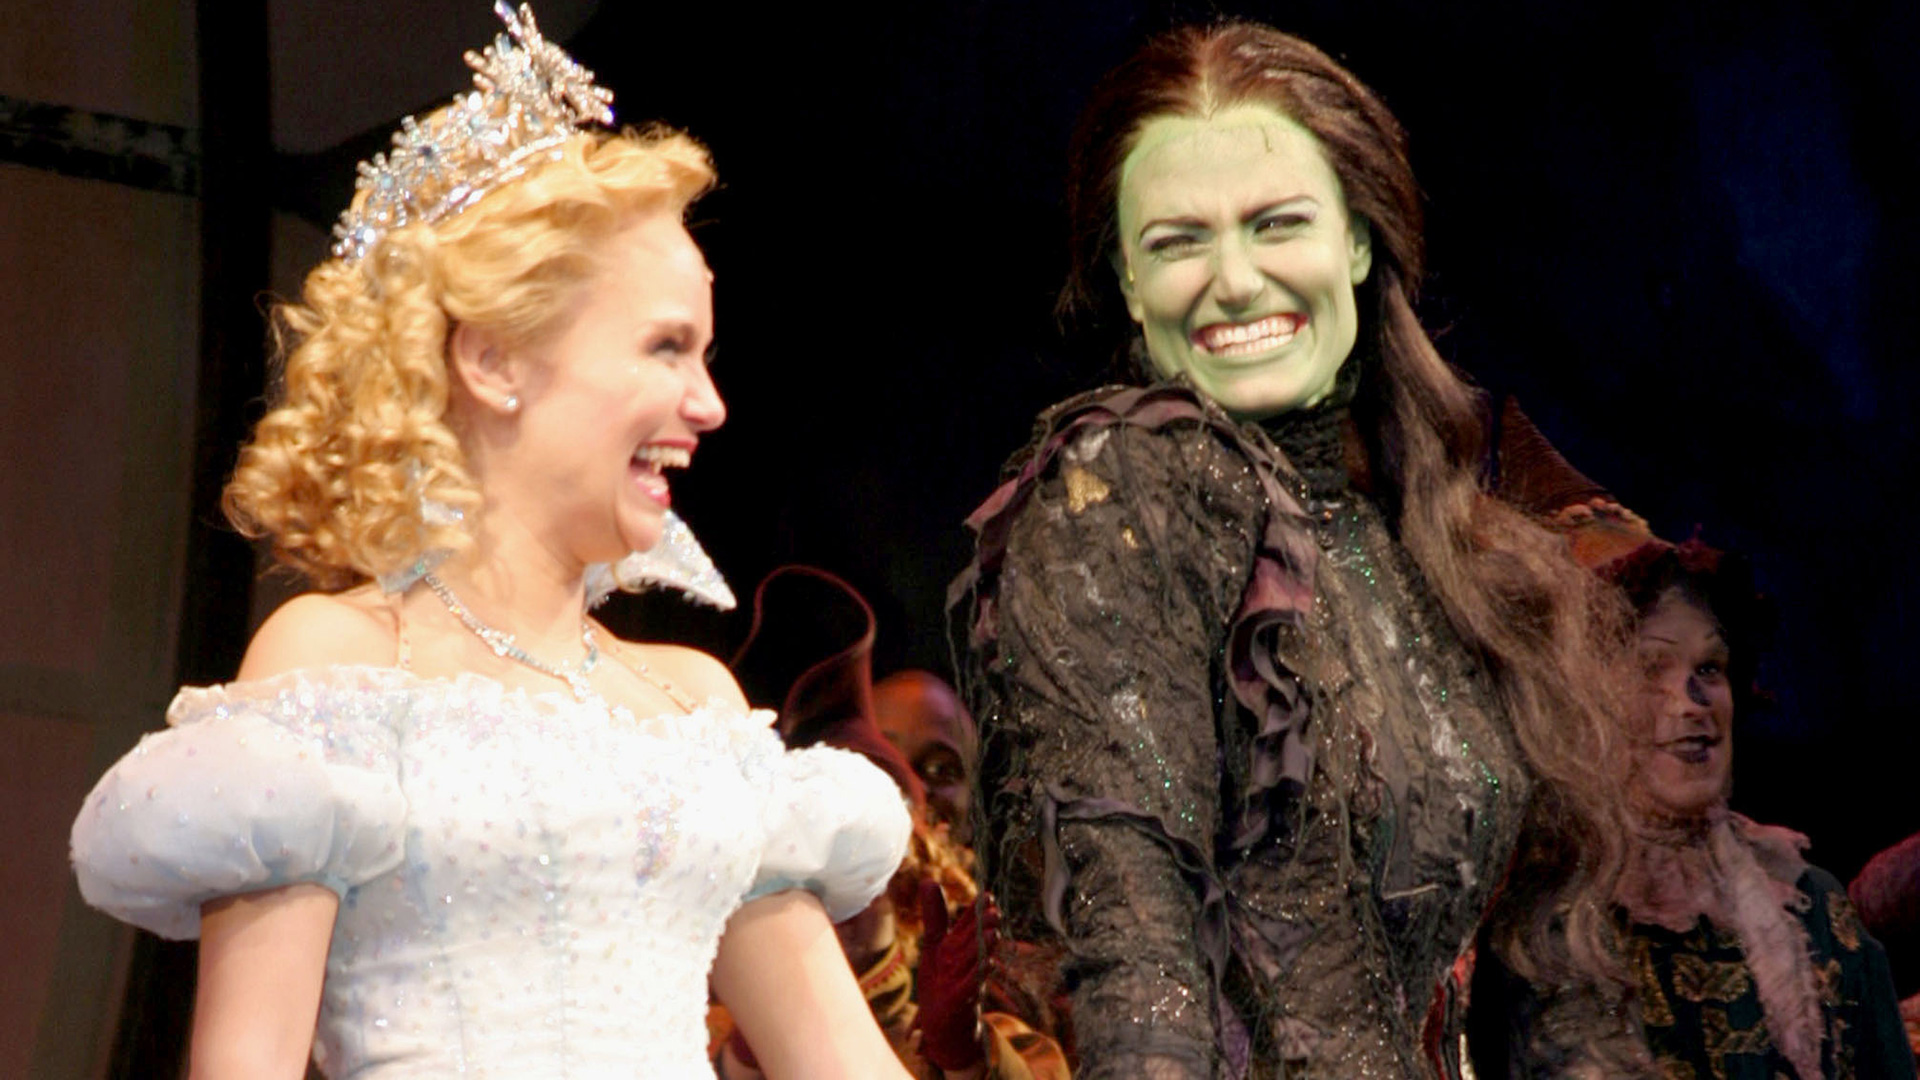 October 30, 2003: “Wicked” Premiered on Broadway